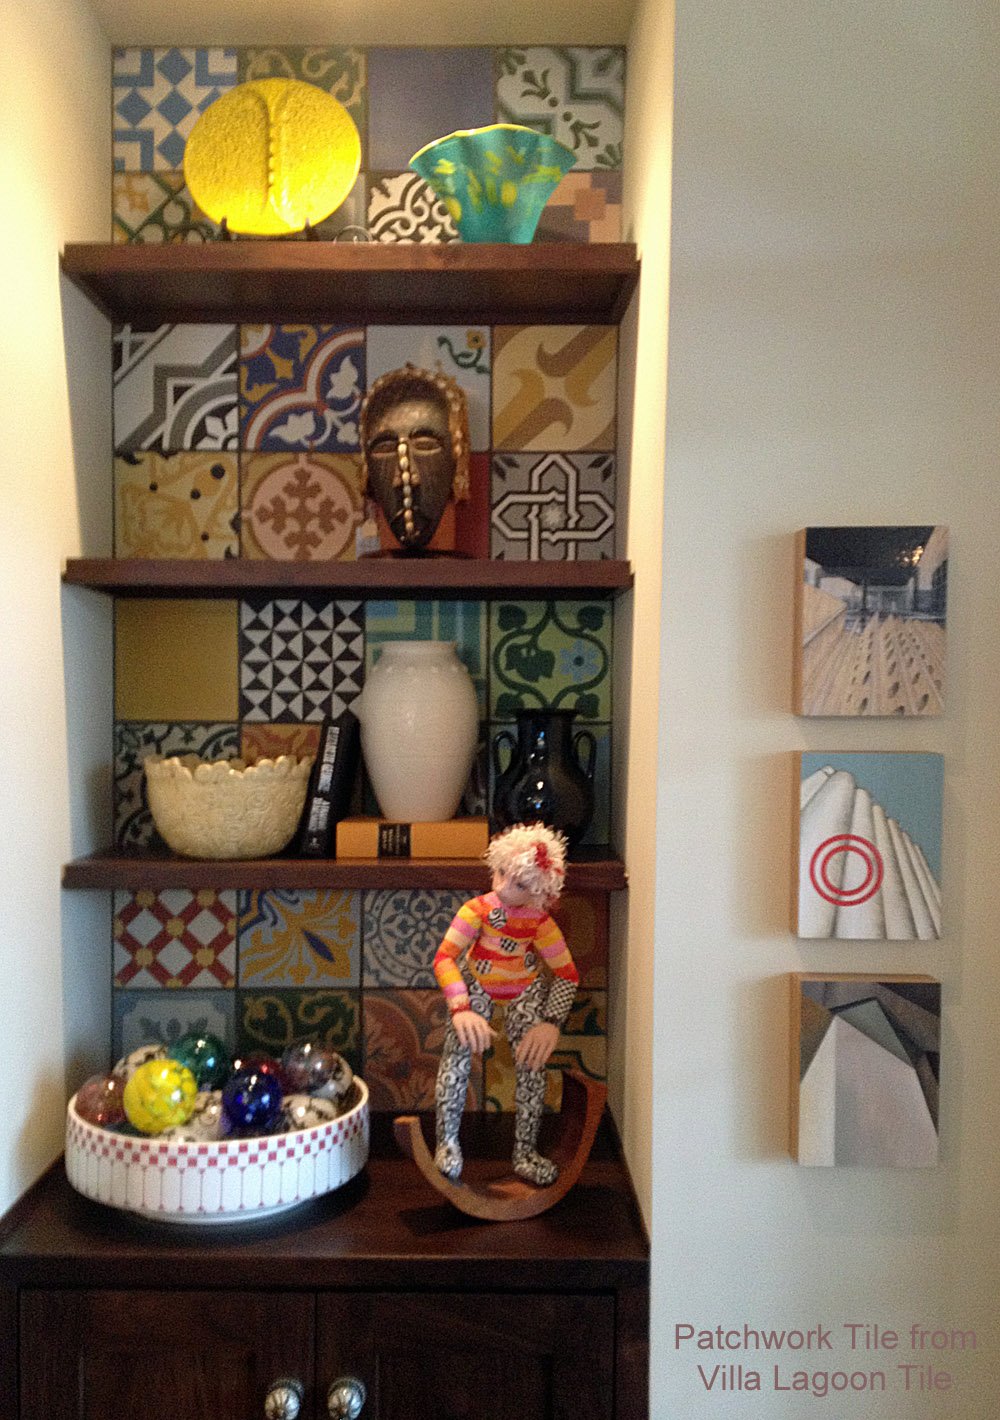 Built in shelves with colorful patchwork tile as a back feature